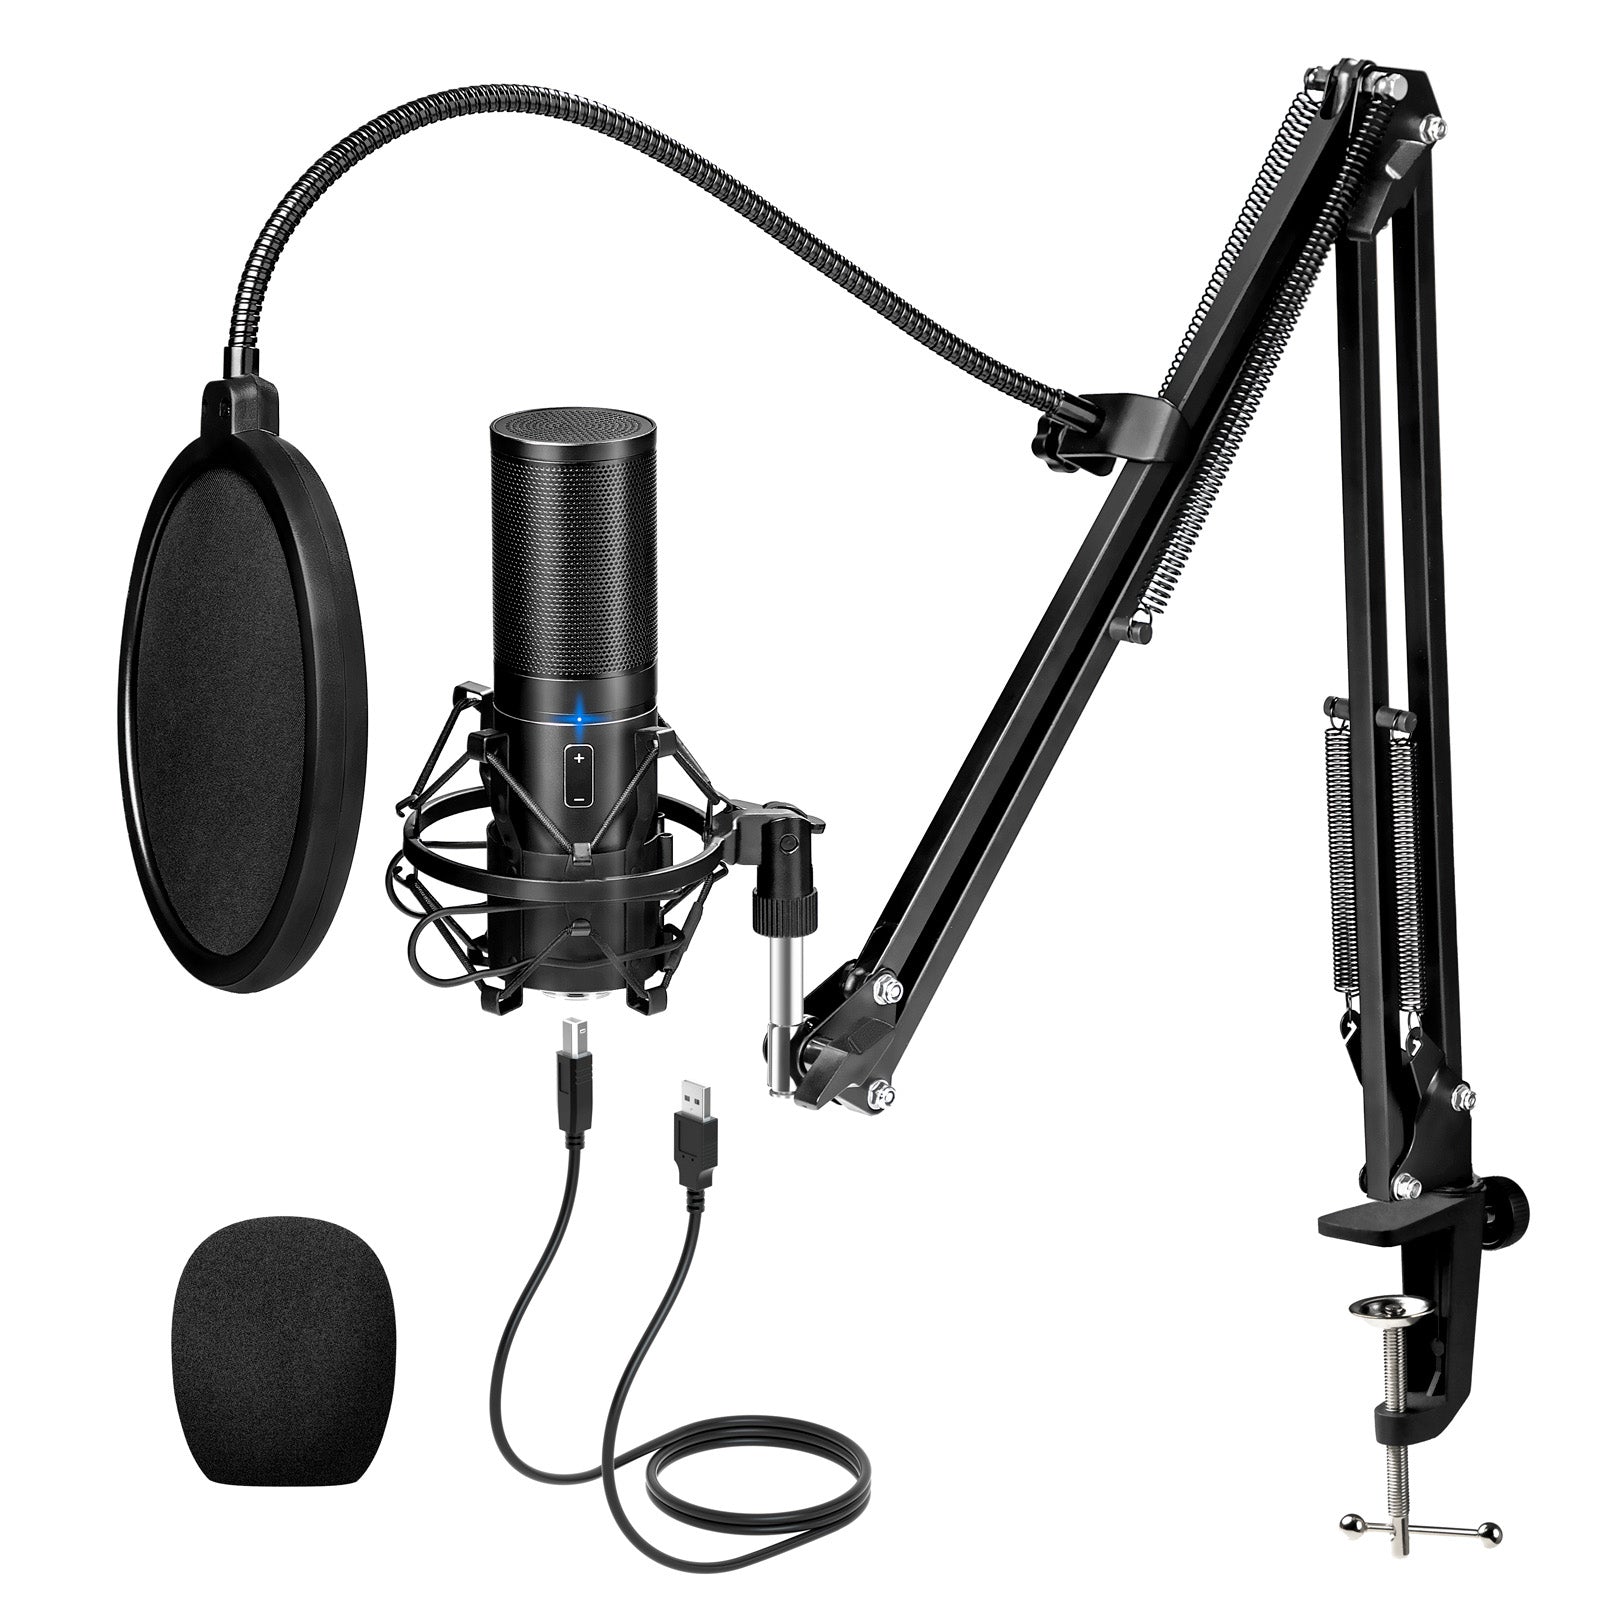  TECURS USB Microphone, Condenser Microphone Kit for